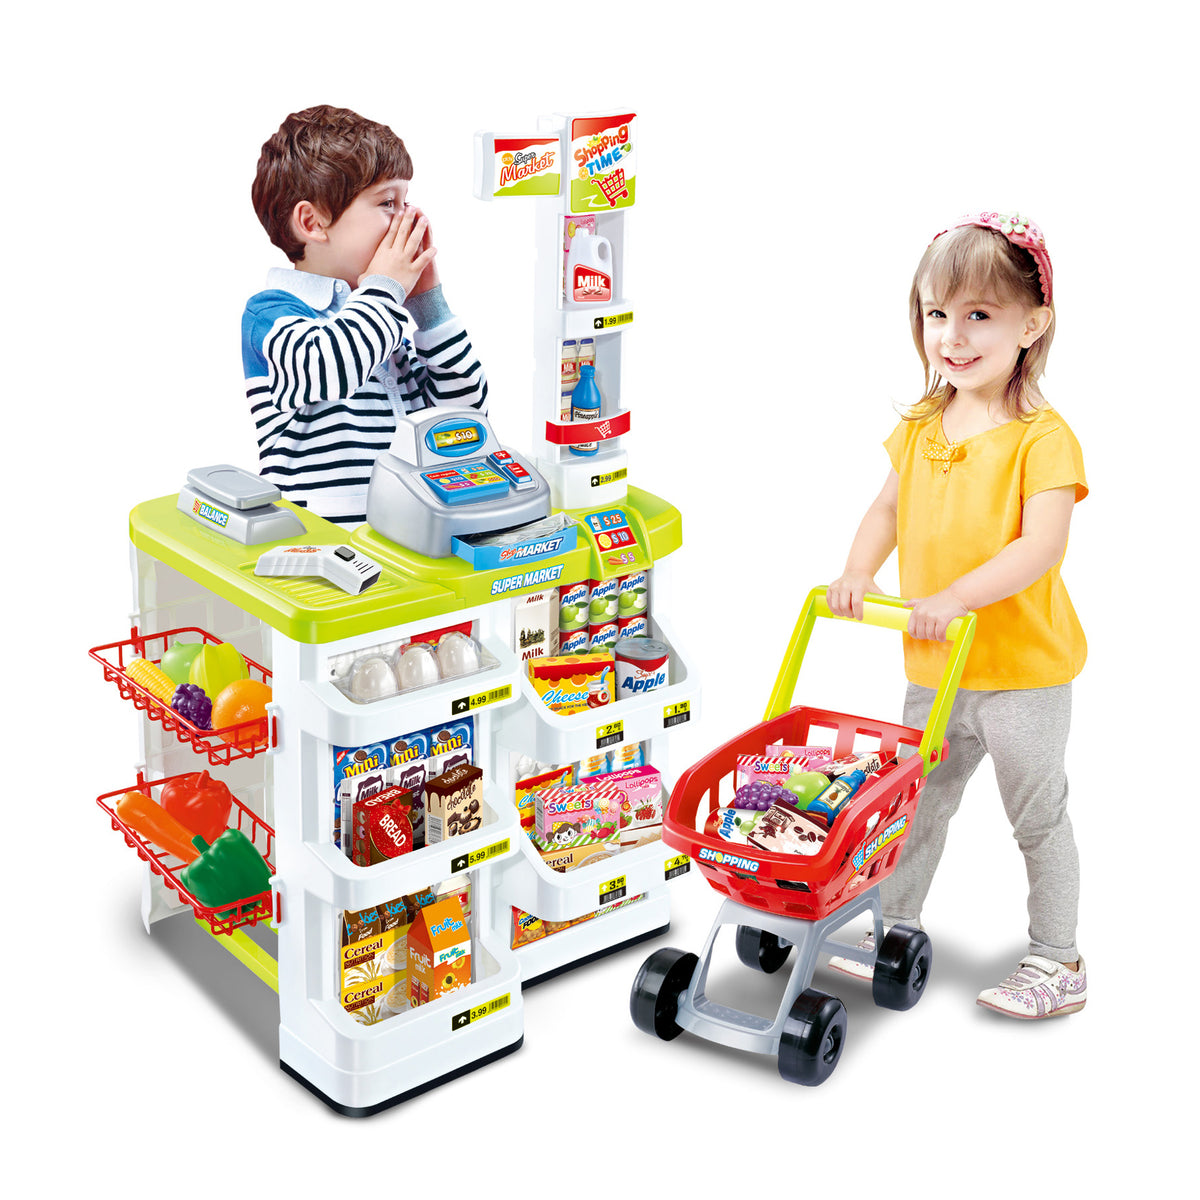 Children's Home Supermarket with Toy Cash Register, barcode scanner that beeps, Fruit & More